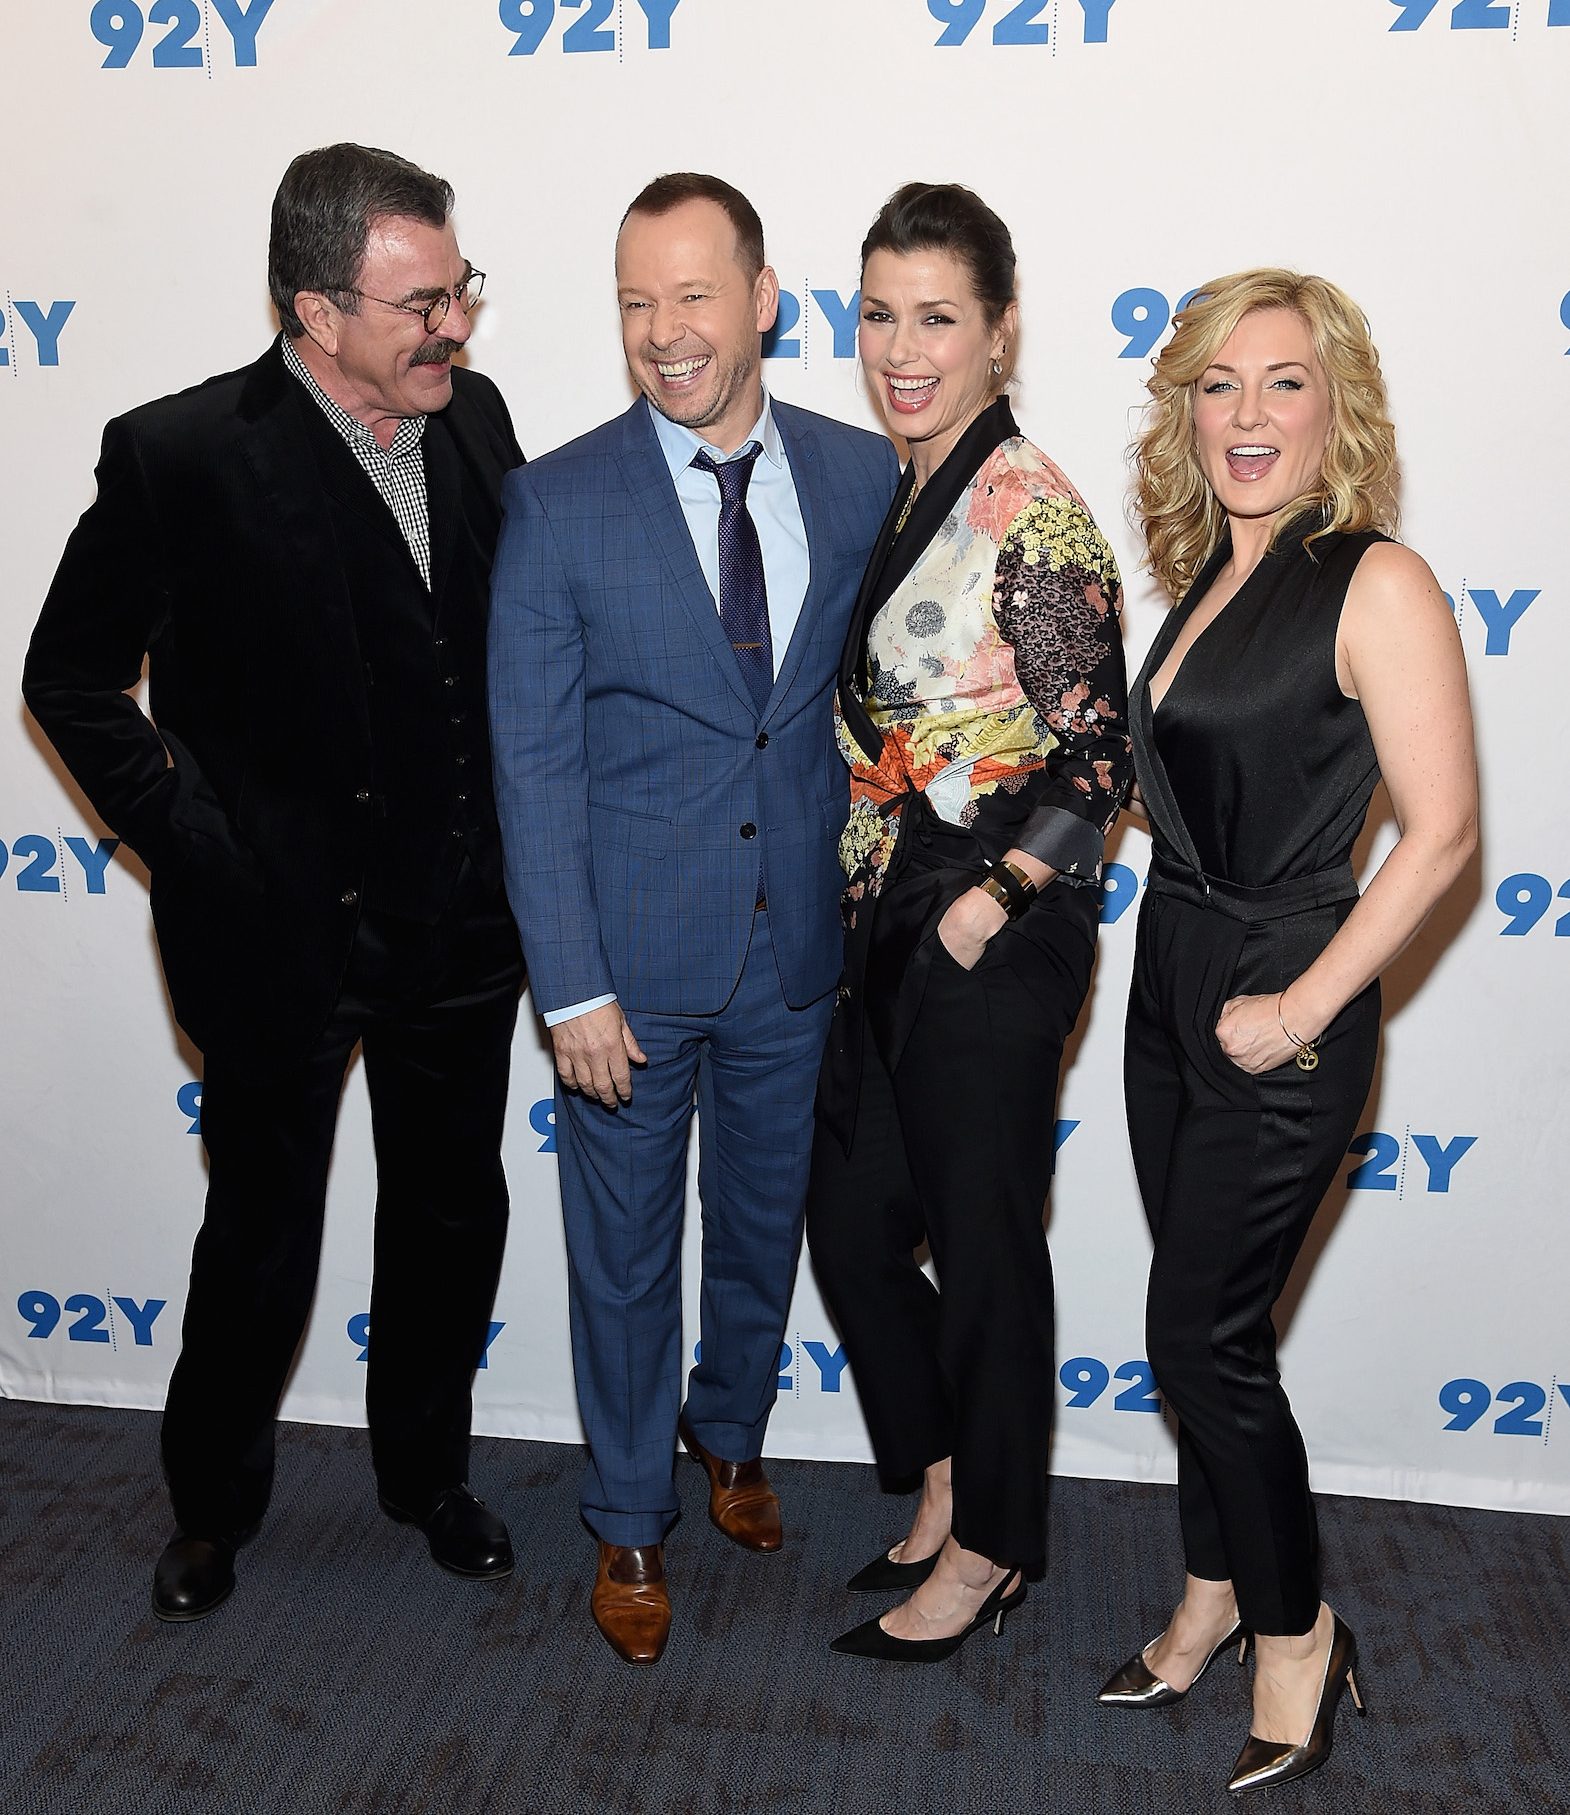 The Tight Bond of the 'Blue Bloods' Cast Unveiling Their Heartwarming